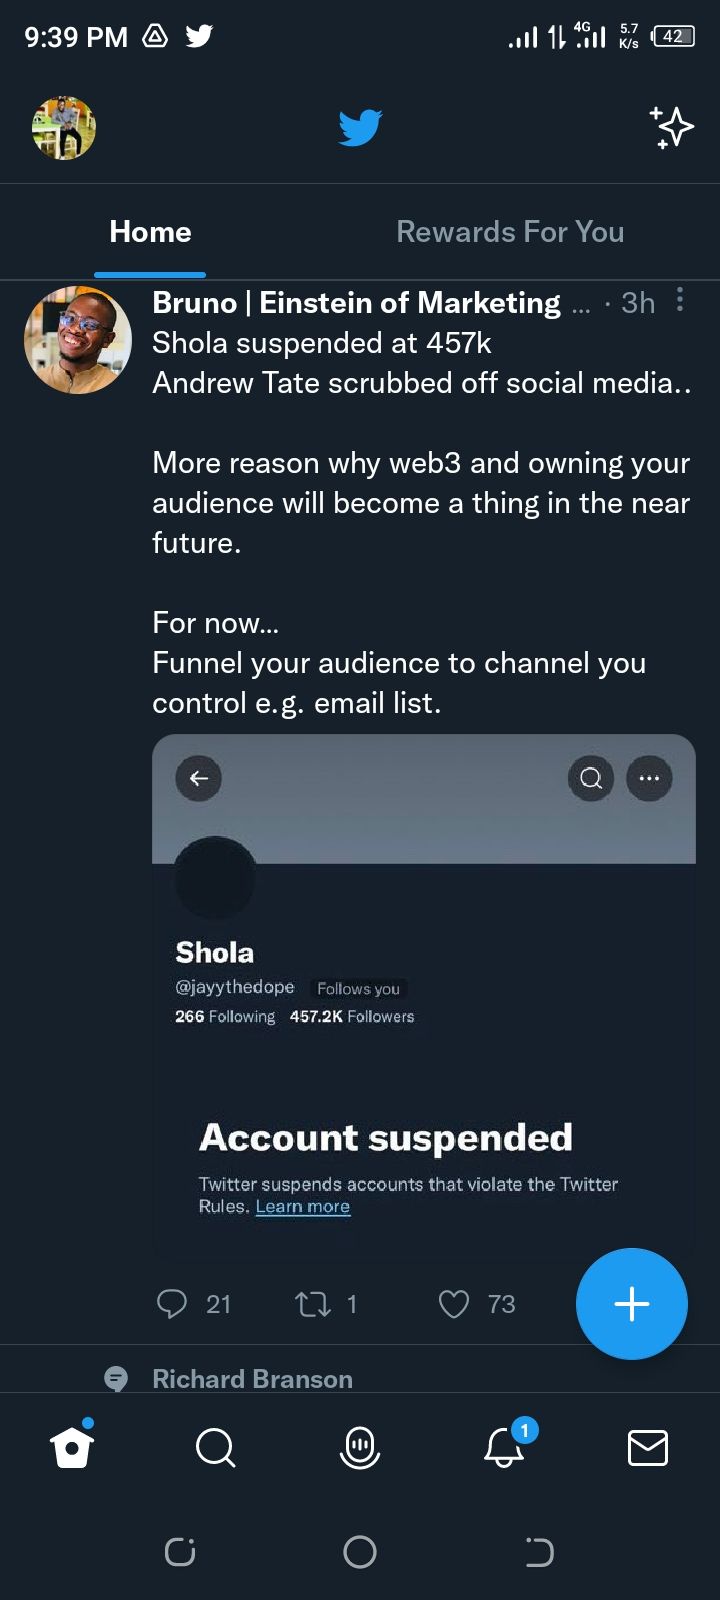 Twitter account suspended 